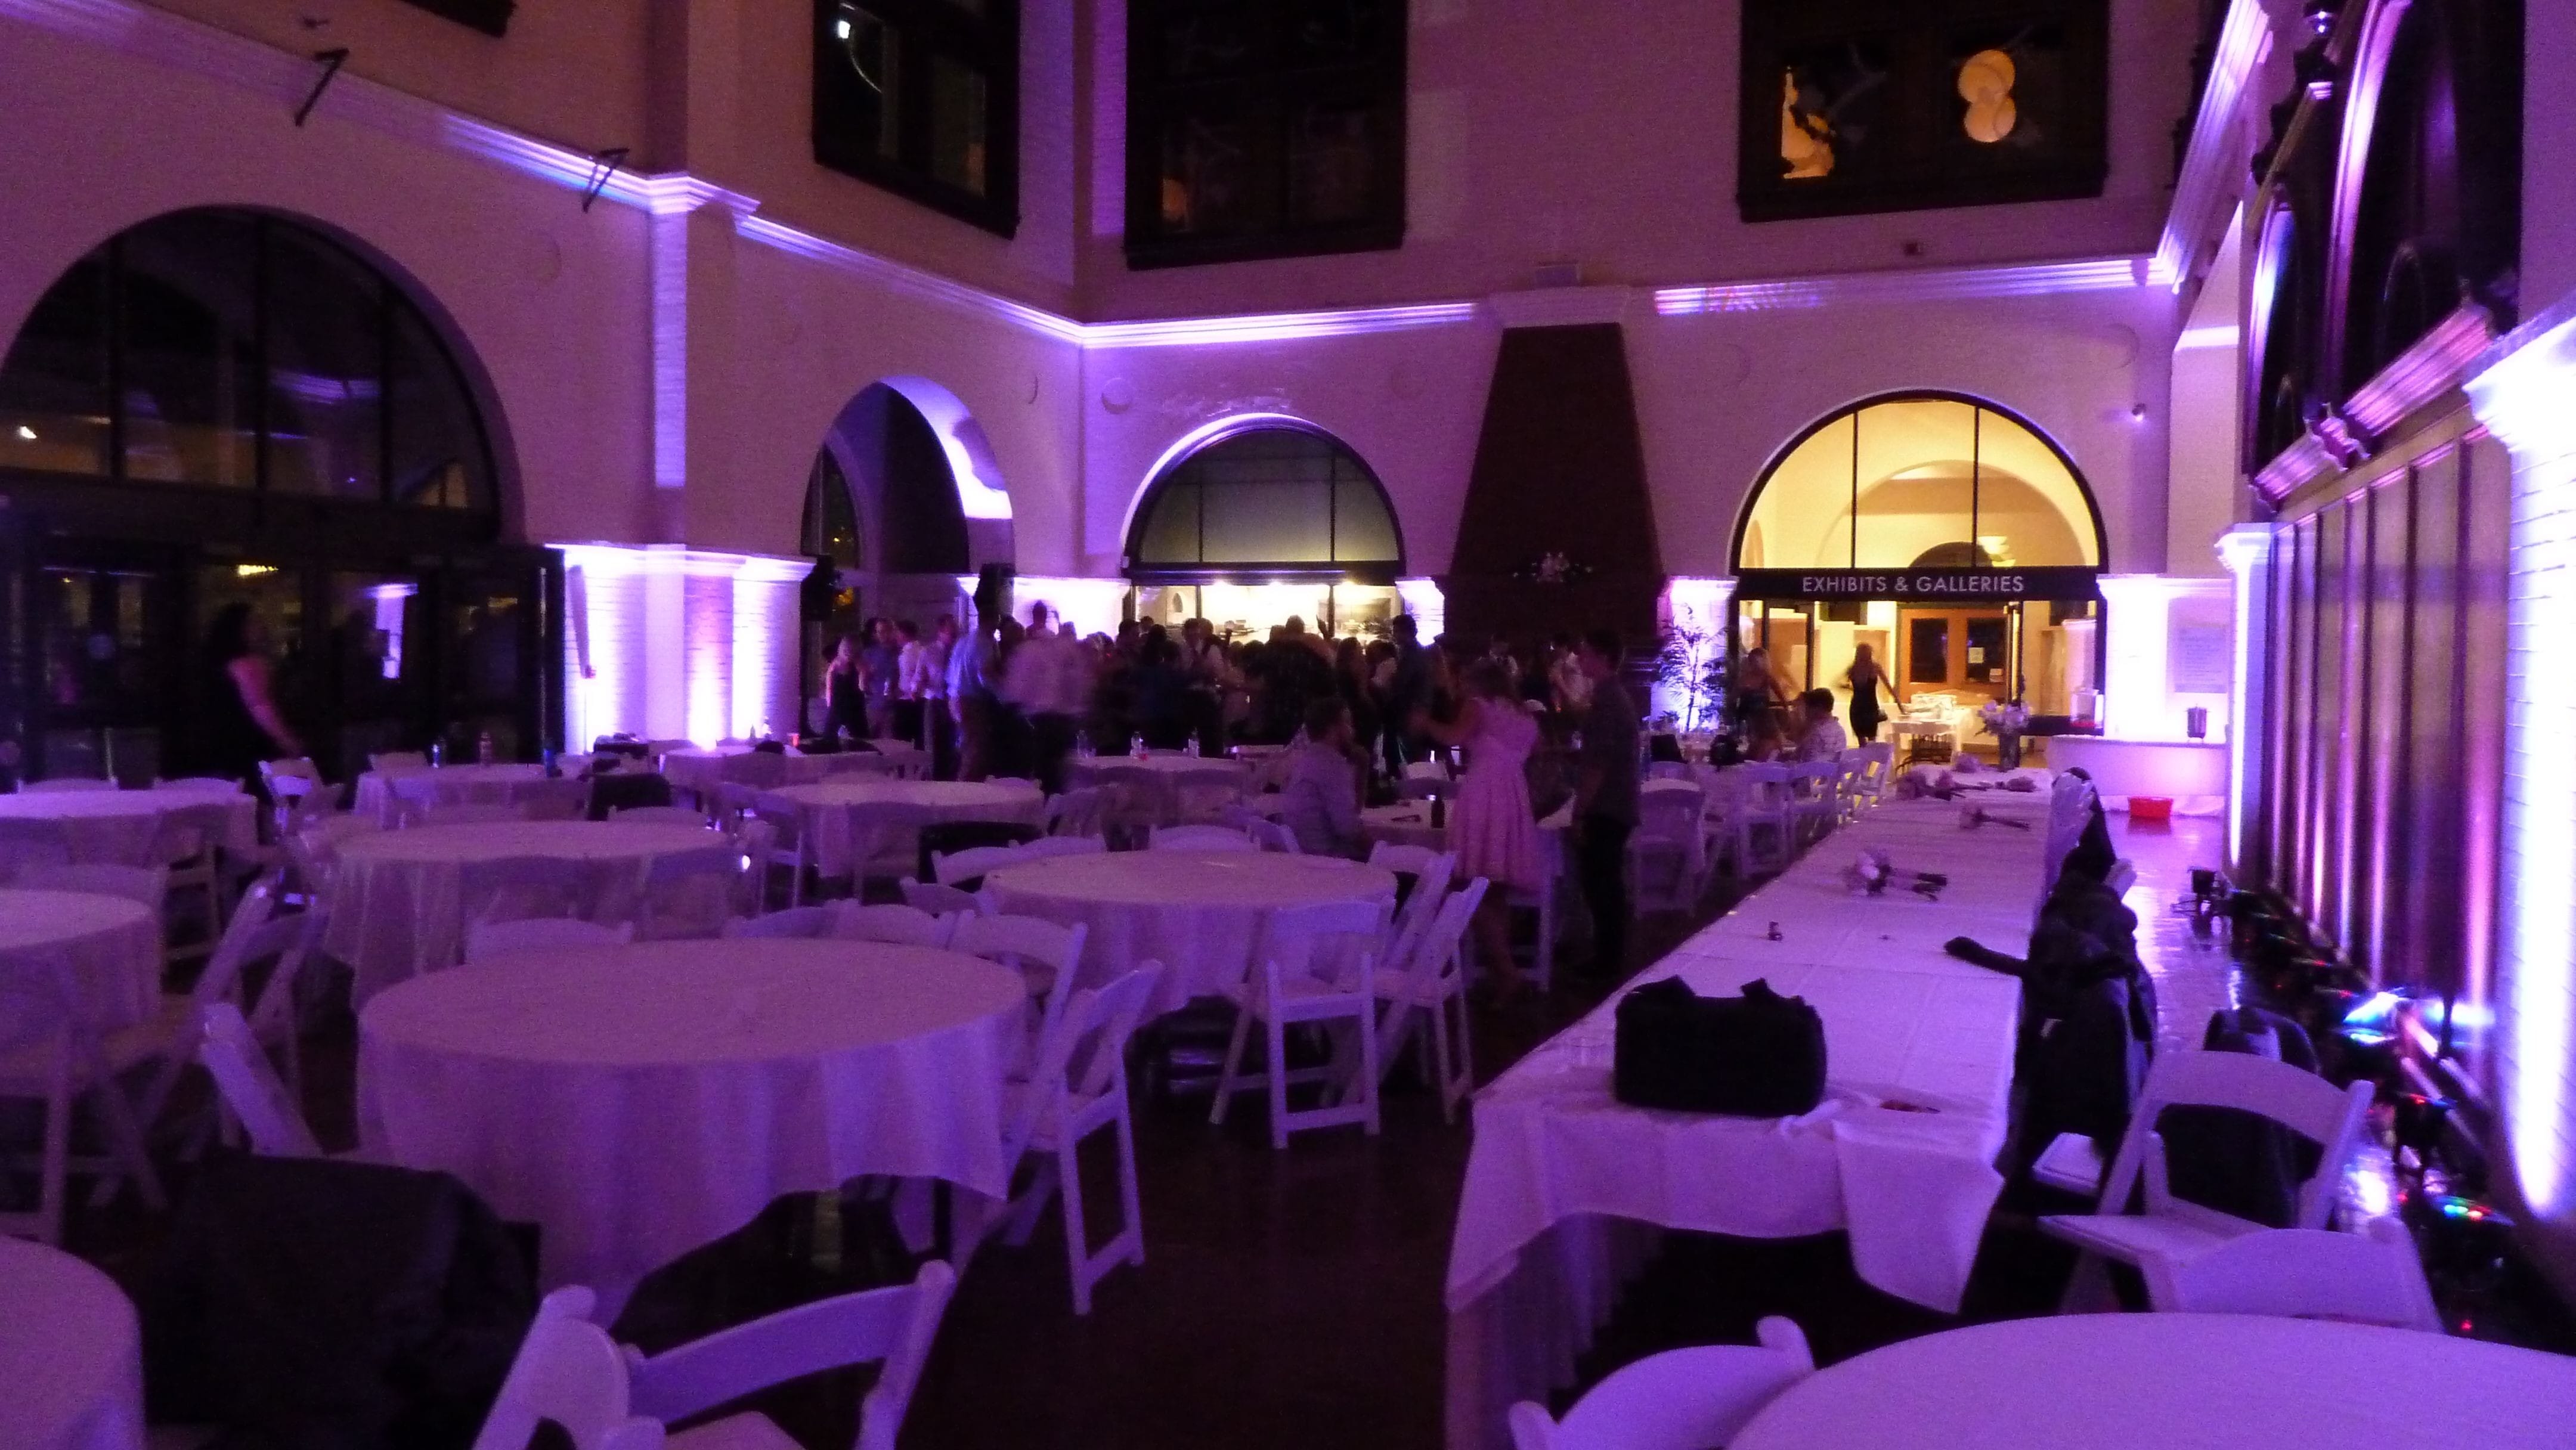 Wedding lighting in the Depot Great Hall in two tone lavender.